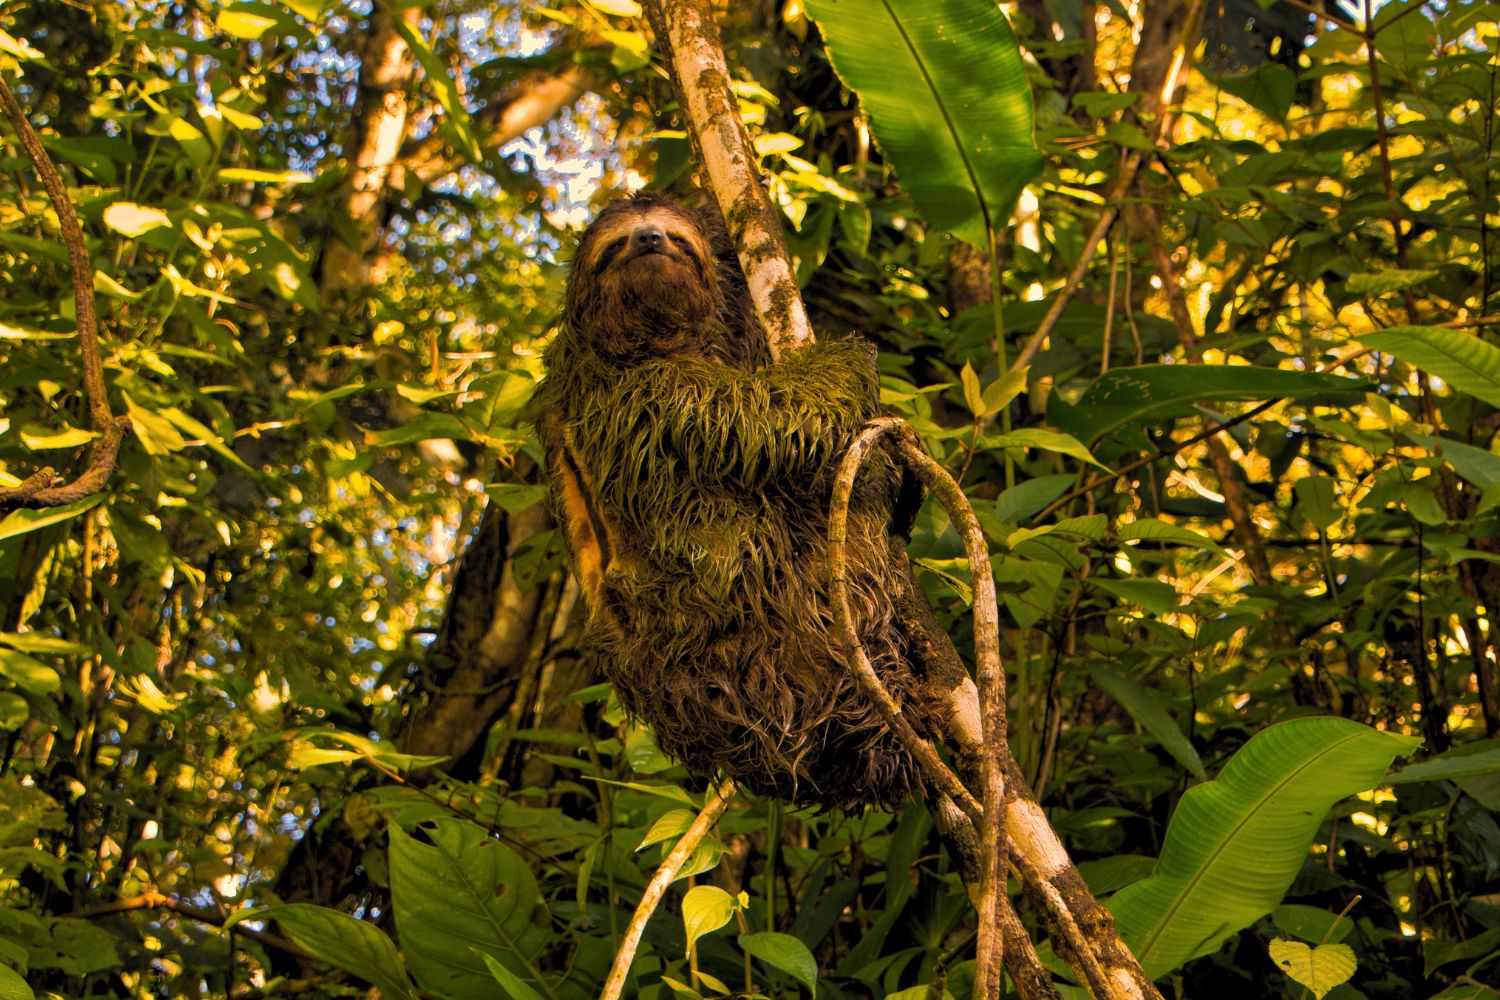 5. Sloth’s bodies are actually their own ecosystem!